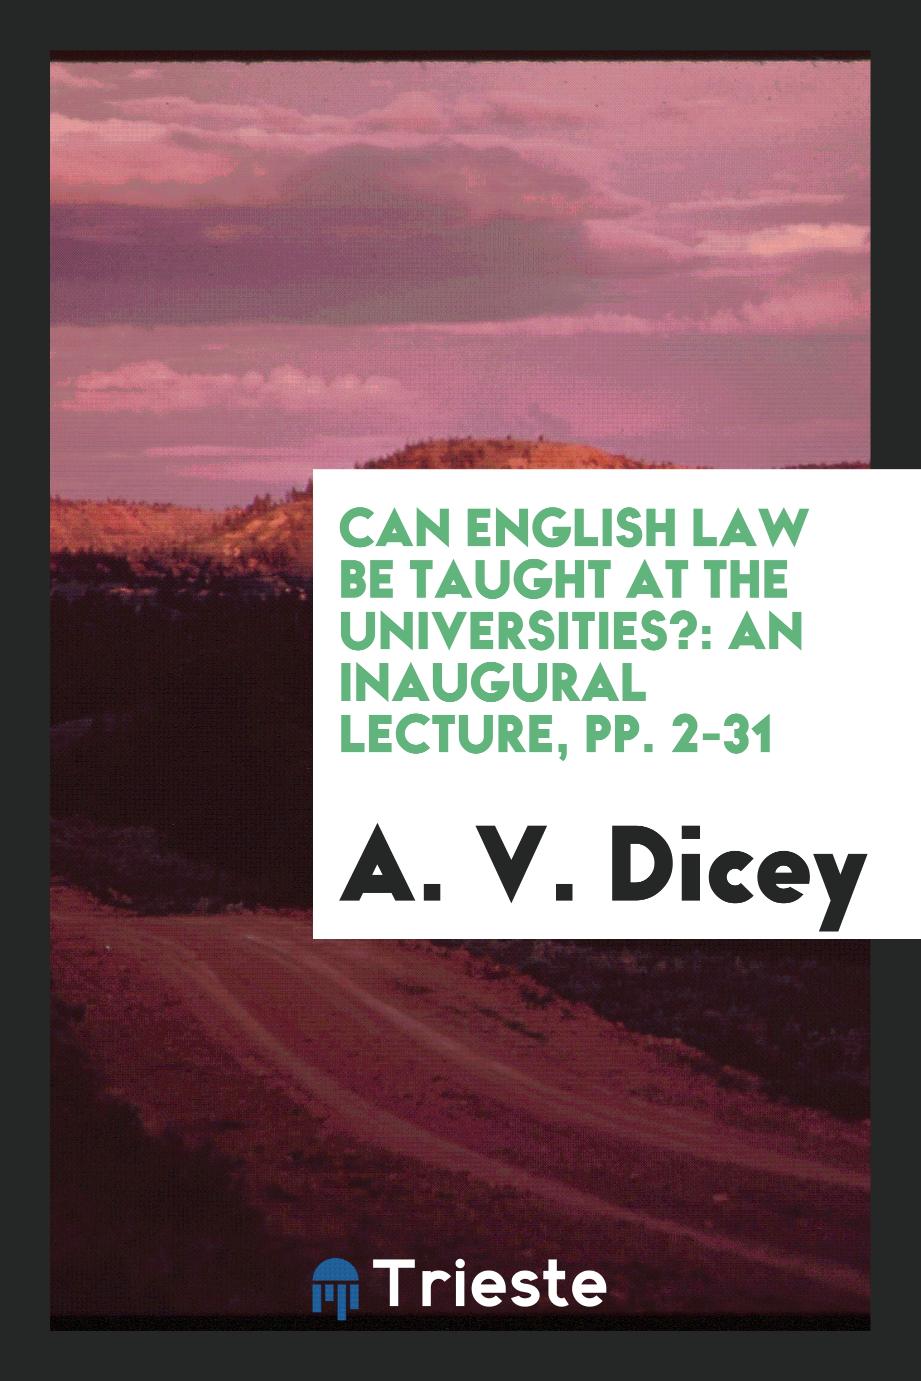 Can English Law be Taught at the Universities?: An Inaugural Lecture, pp. 2-31